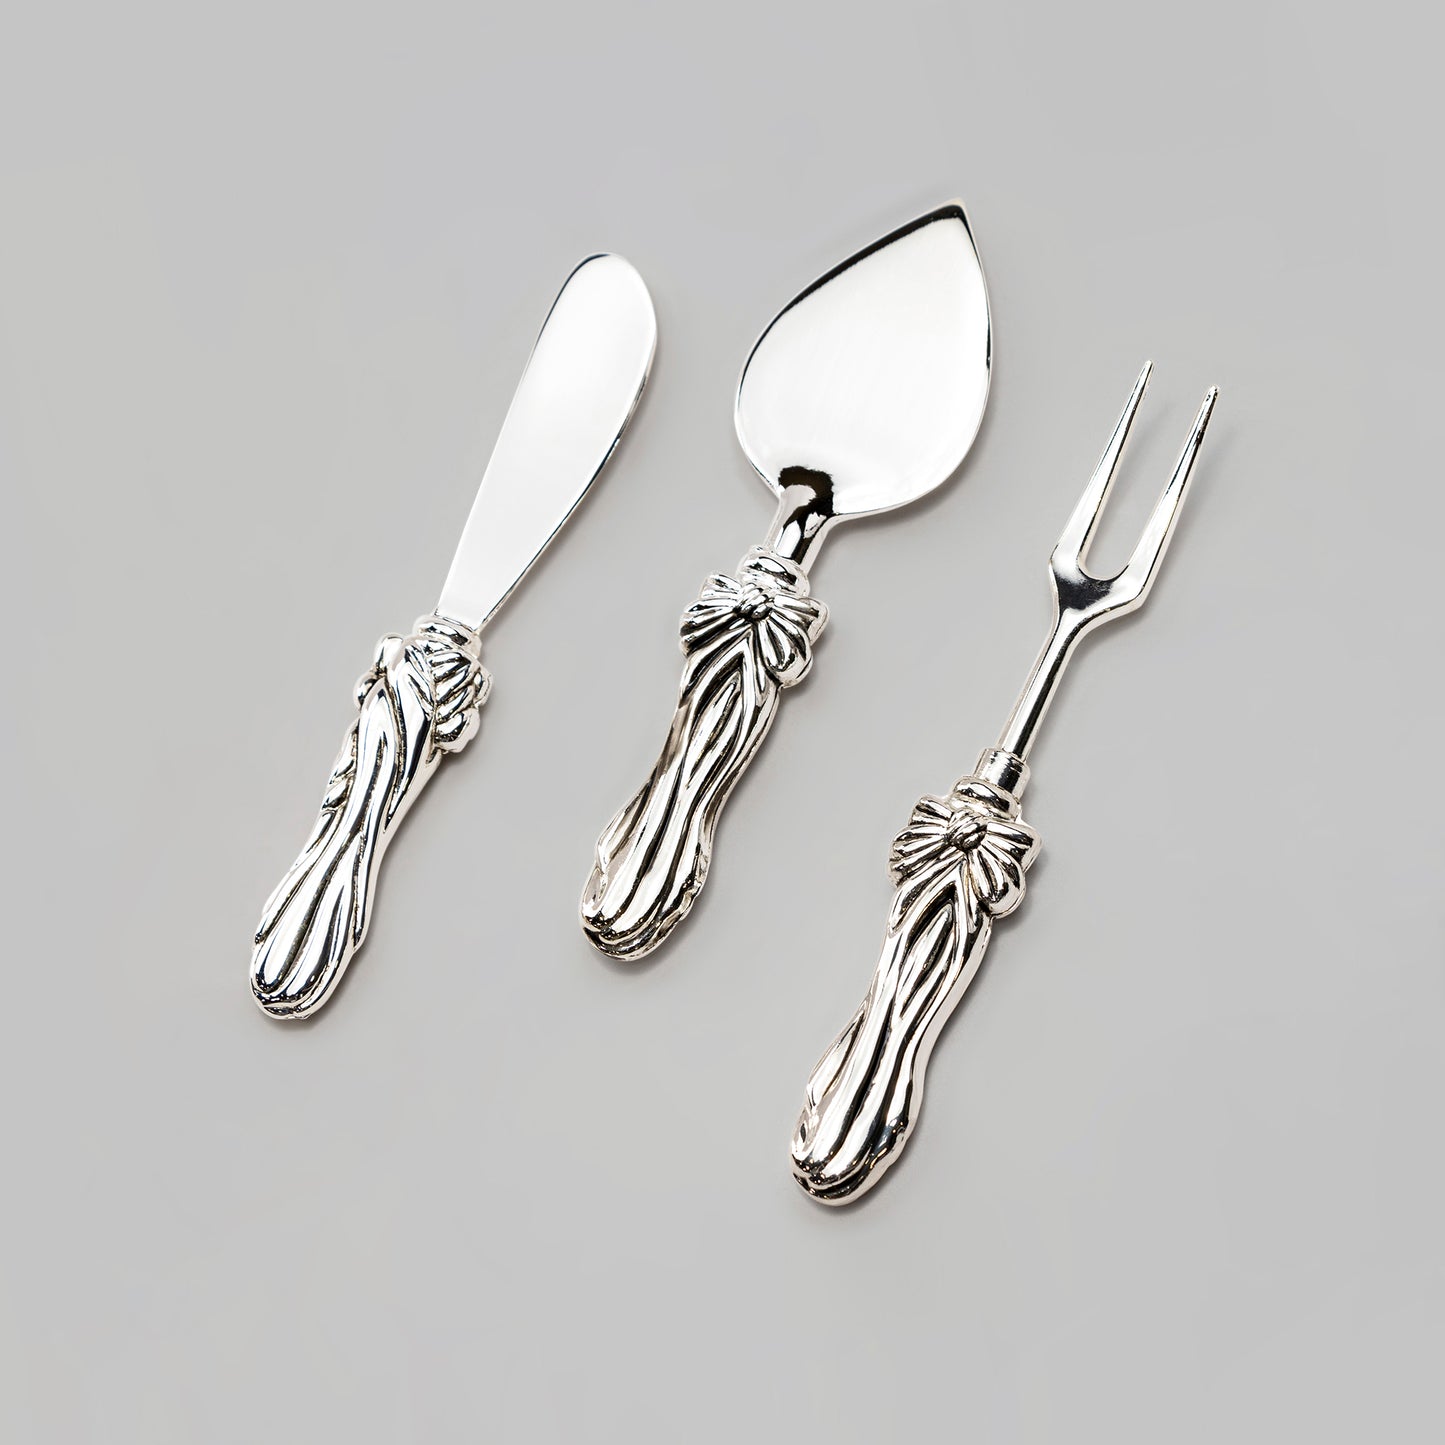 Silver Plated Hostess Flatware Set of 3 with Ribbon Handle Design